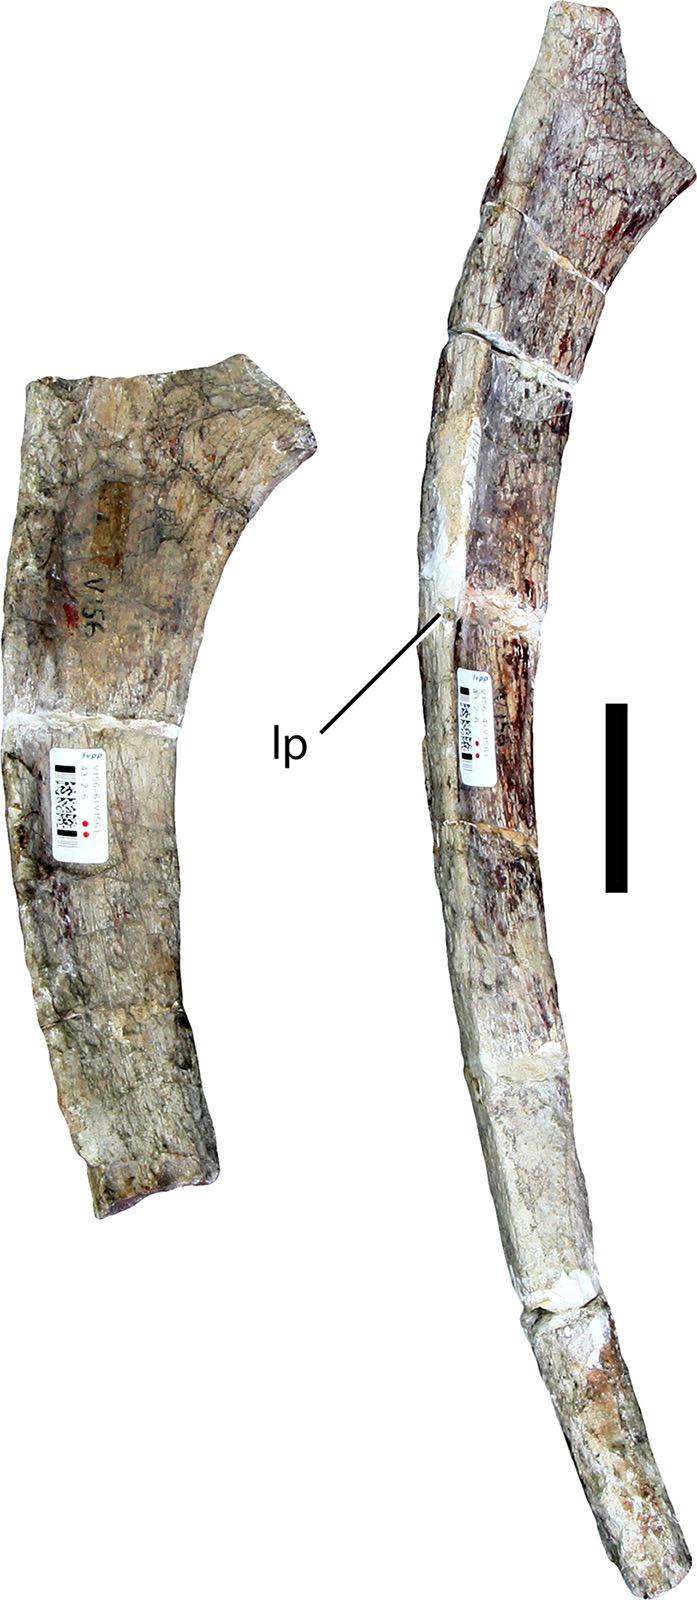 Figure 6 Dorsal ribs (IVPP V156B). Abbreviations: lp, lateral plate. Scale bar equals 5 cm. Photographs by B.W.M.